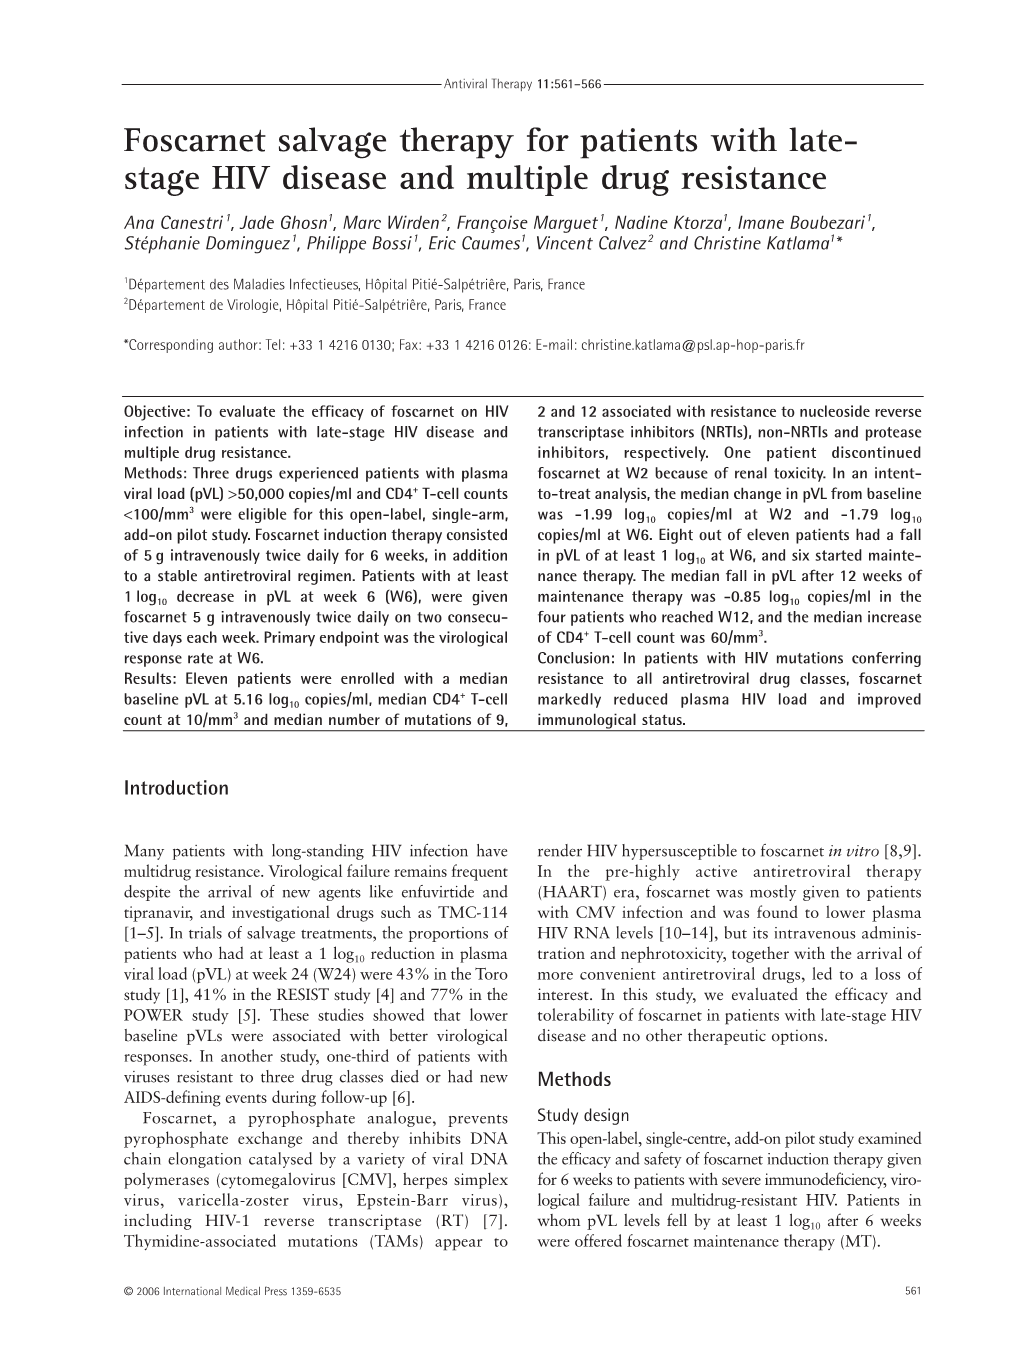 Foscarnet Salvage Therapy for Patients with Late- Stage HIV Disease And